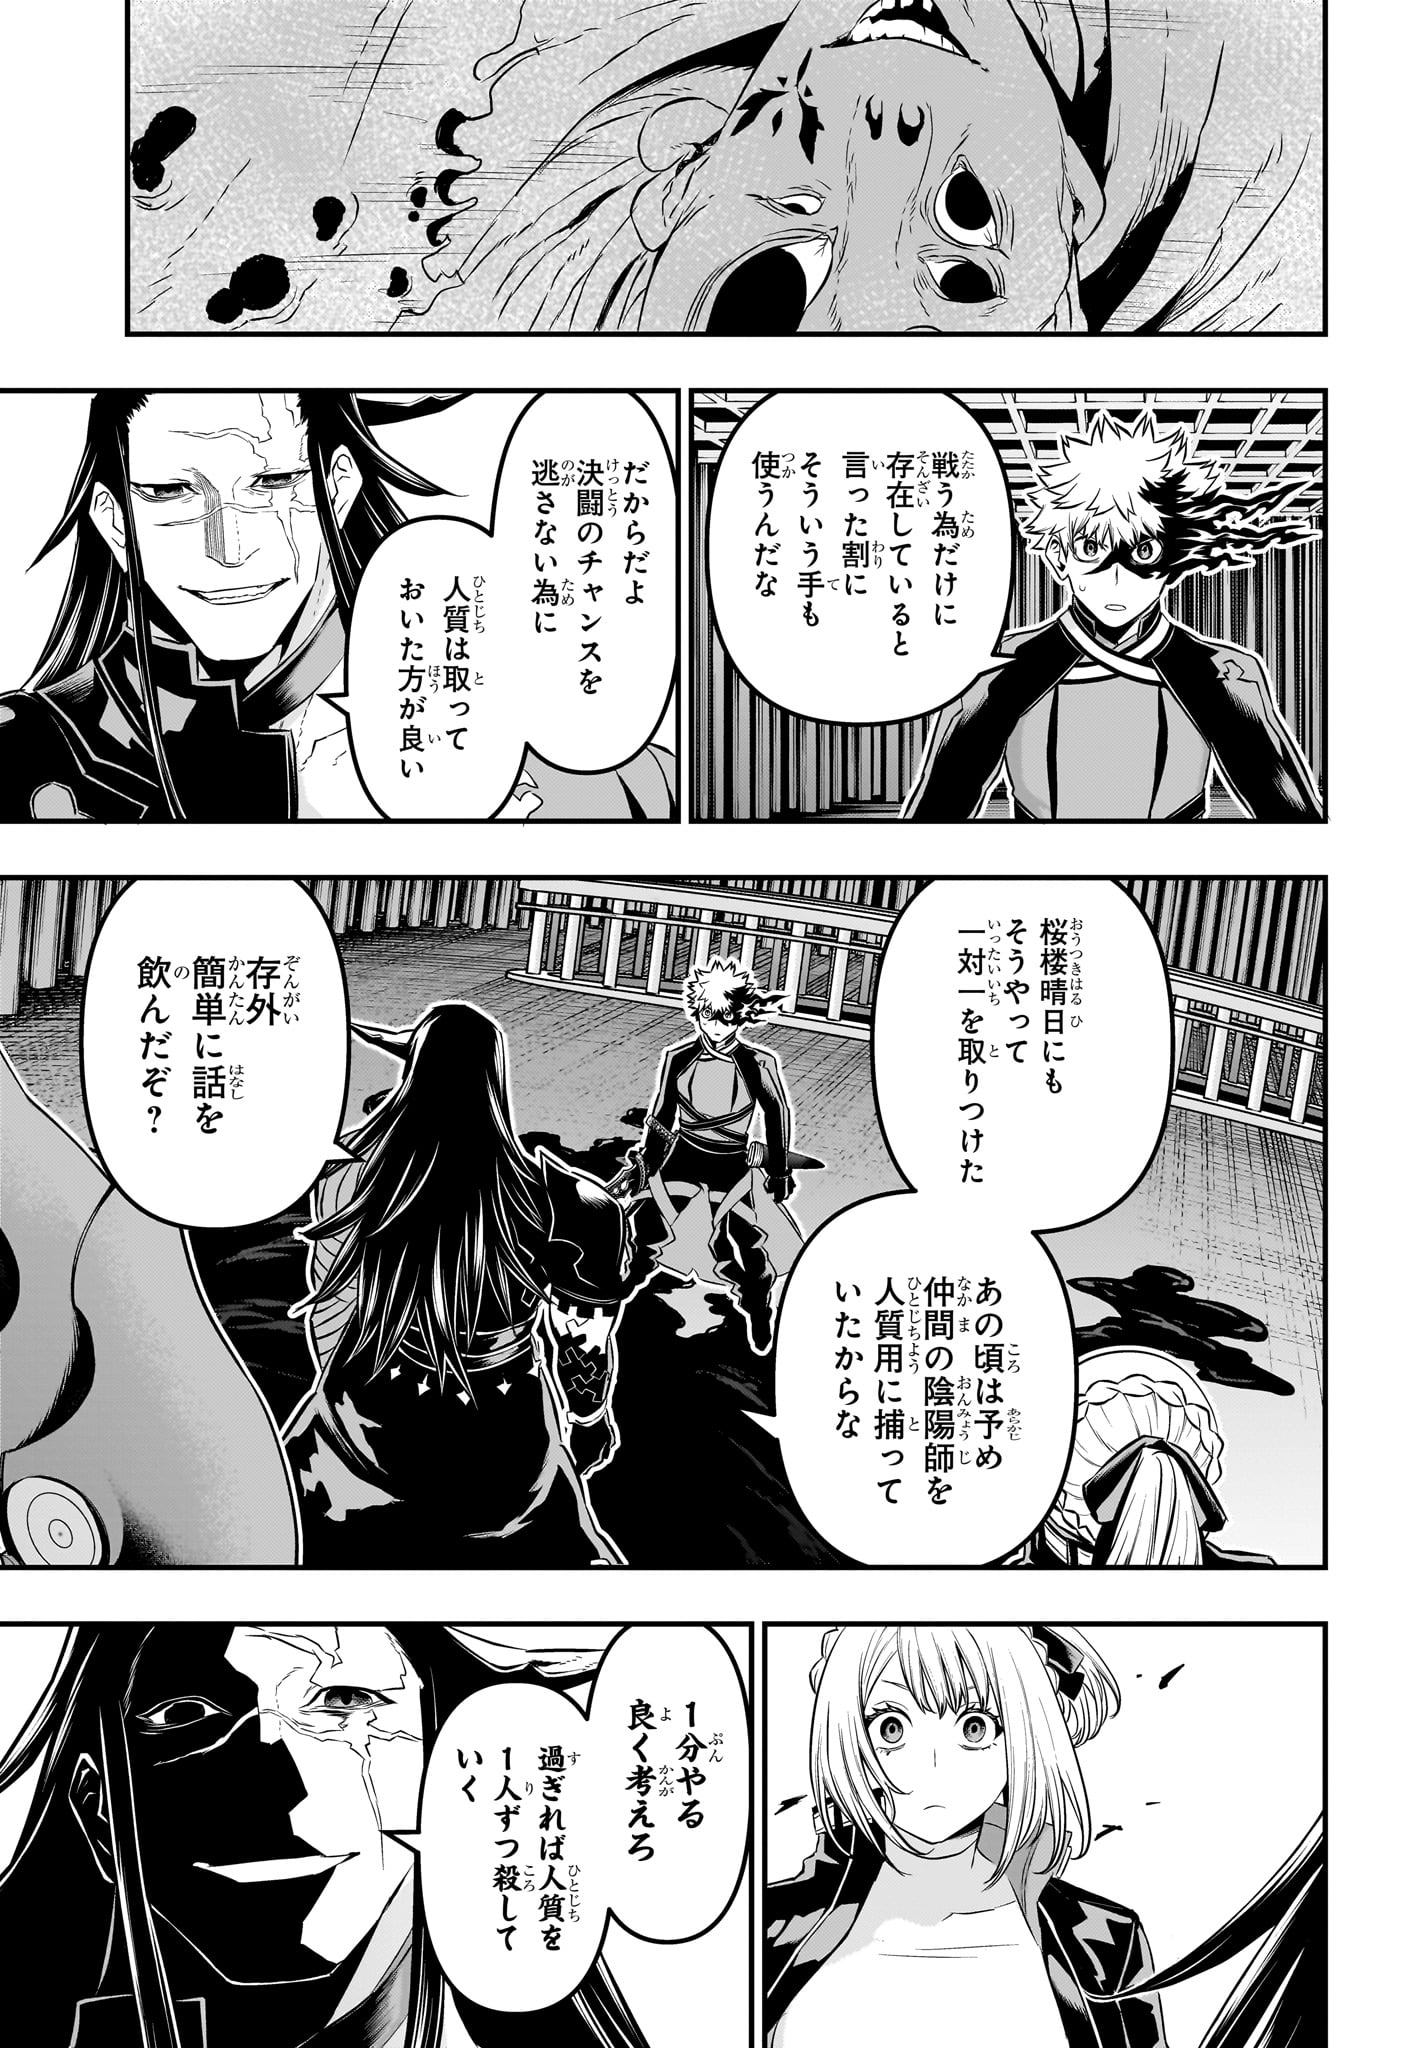 Nue no Onmyouji - Chapter 53 - Page 3